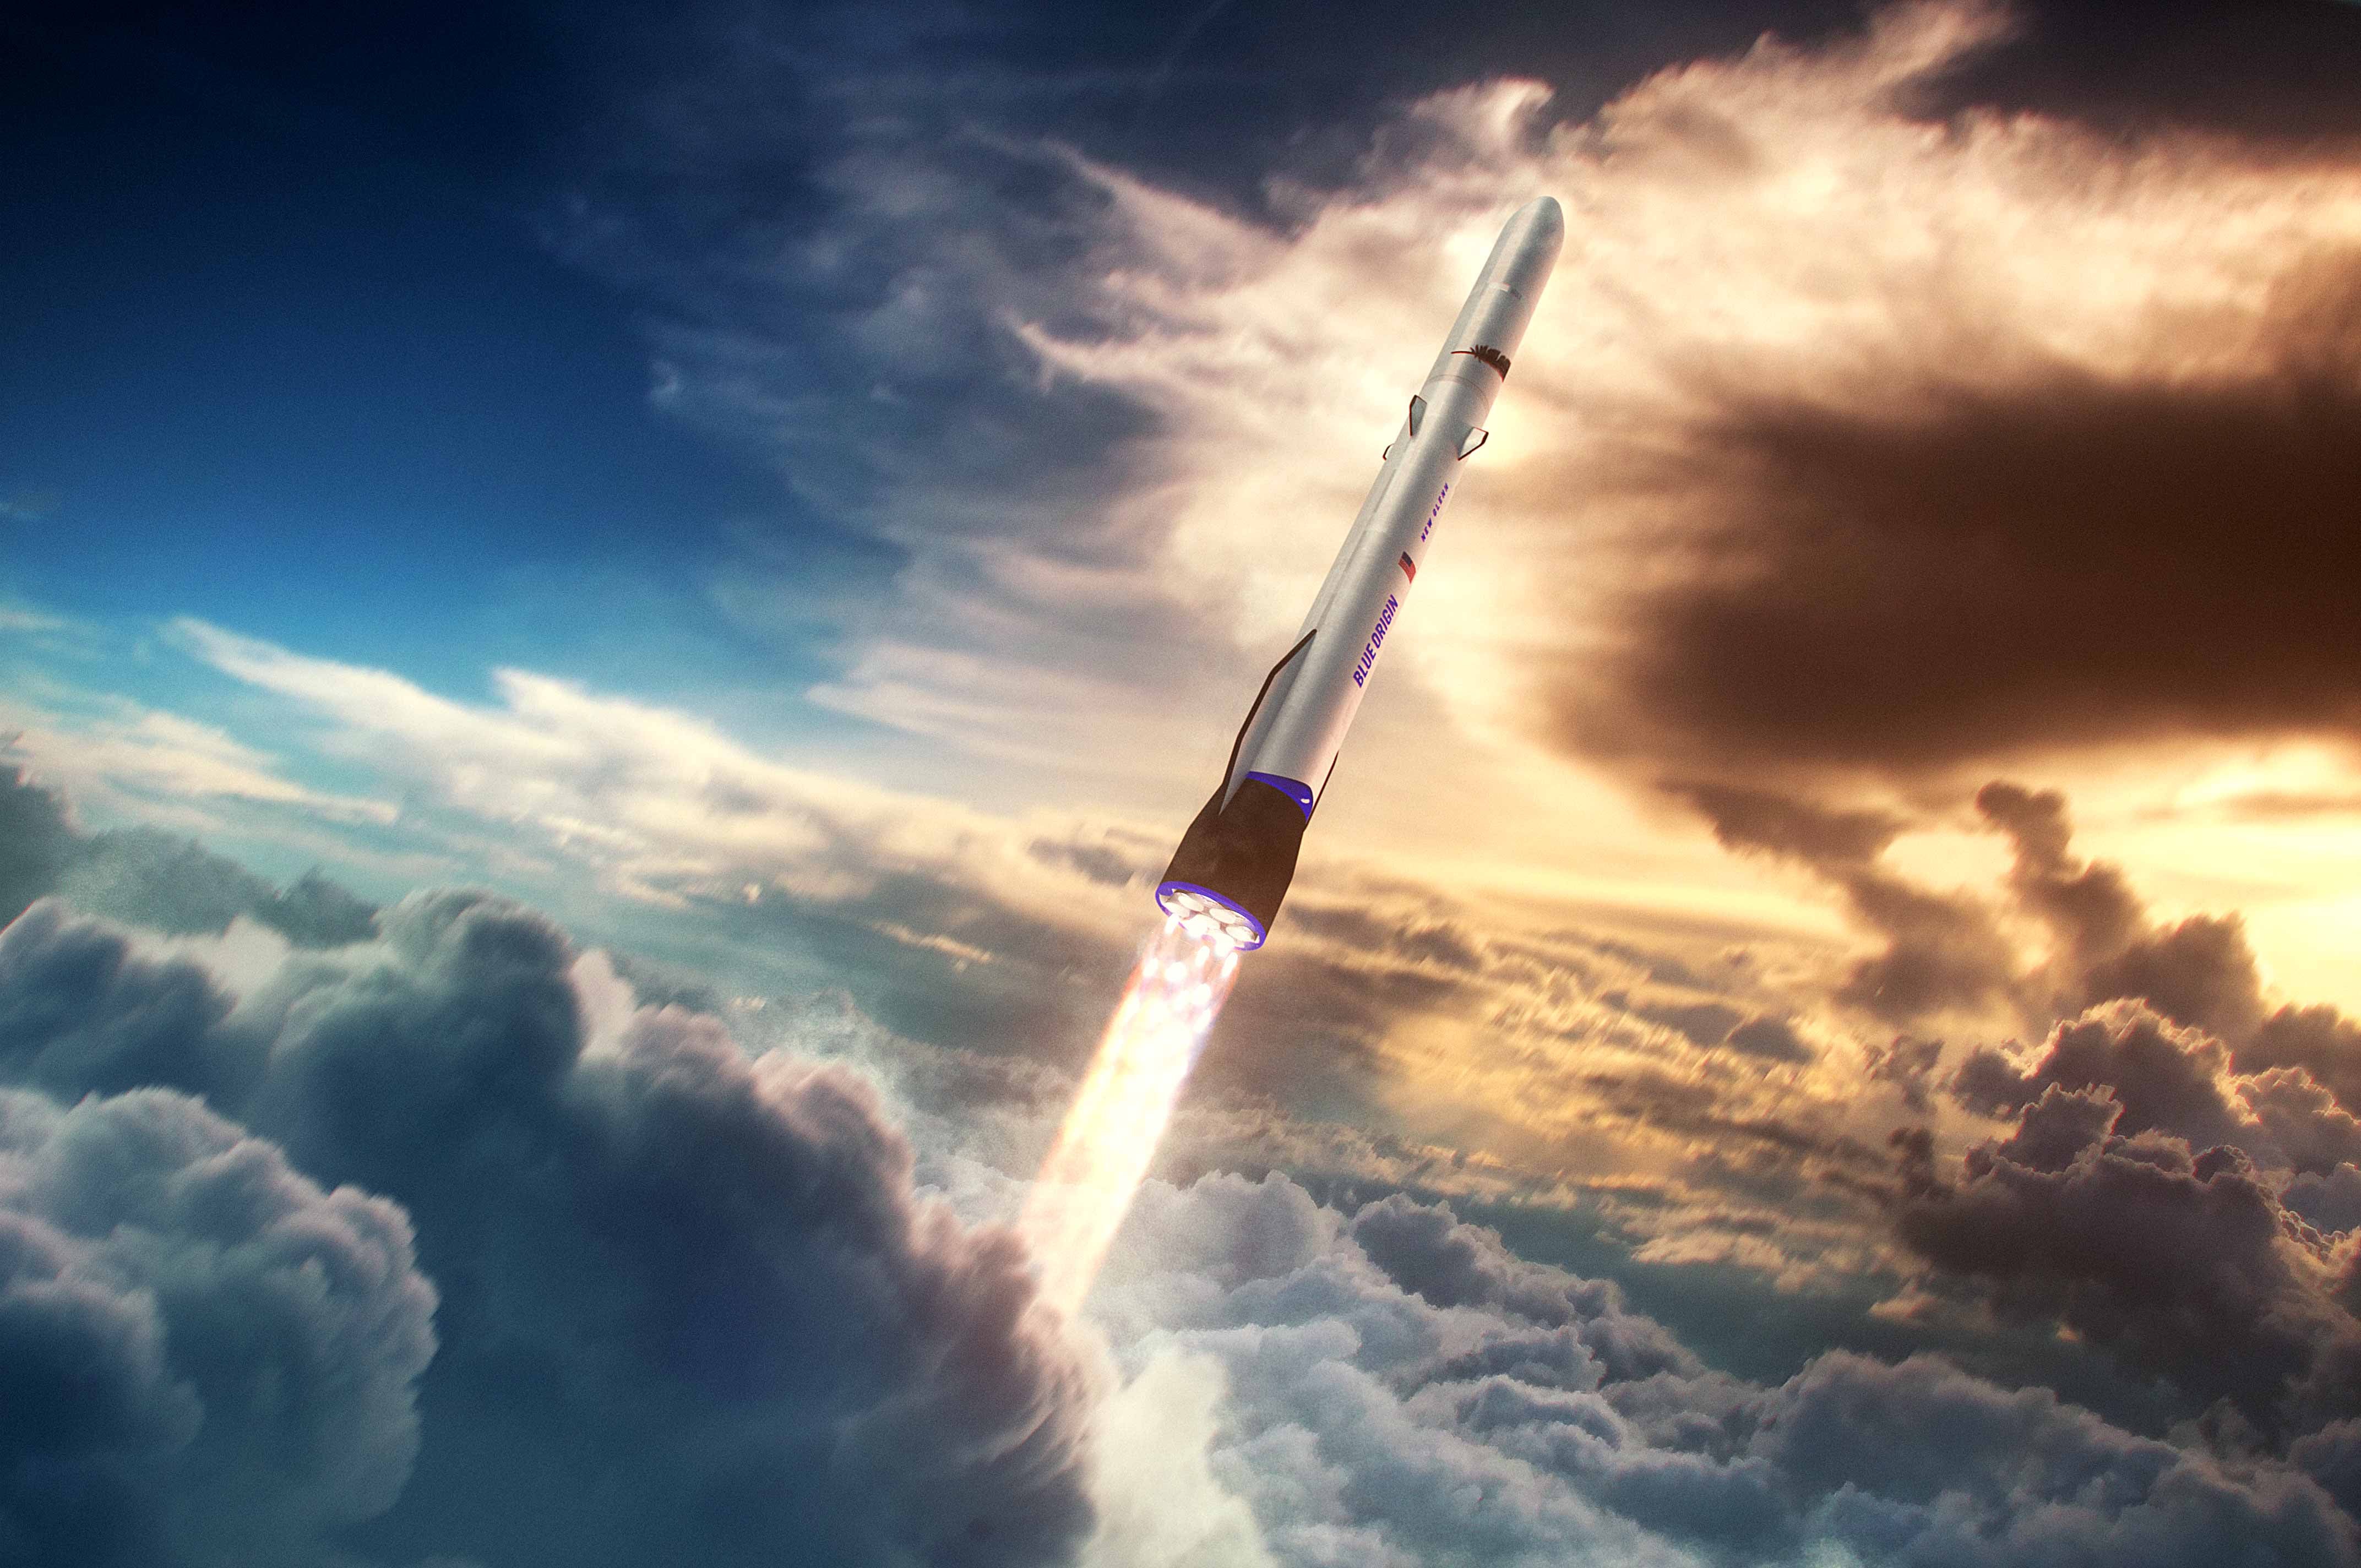 Rendering of Blue Origin's New Glenn reusable rocket, which may or may not fly in 2023.  (Image: Blue Origin)